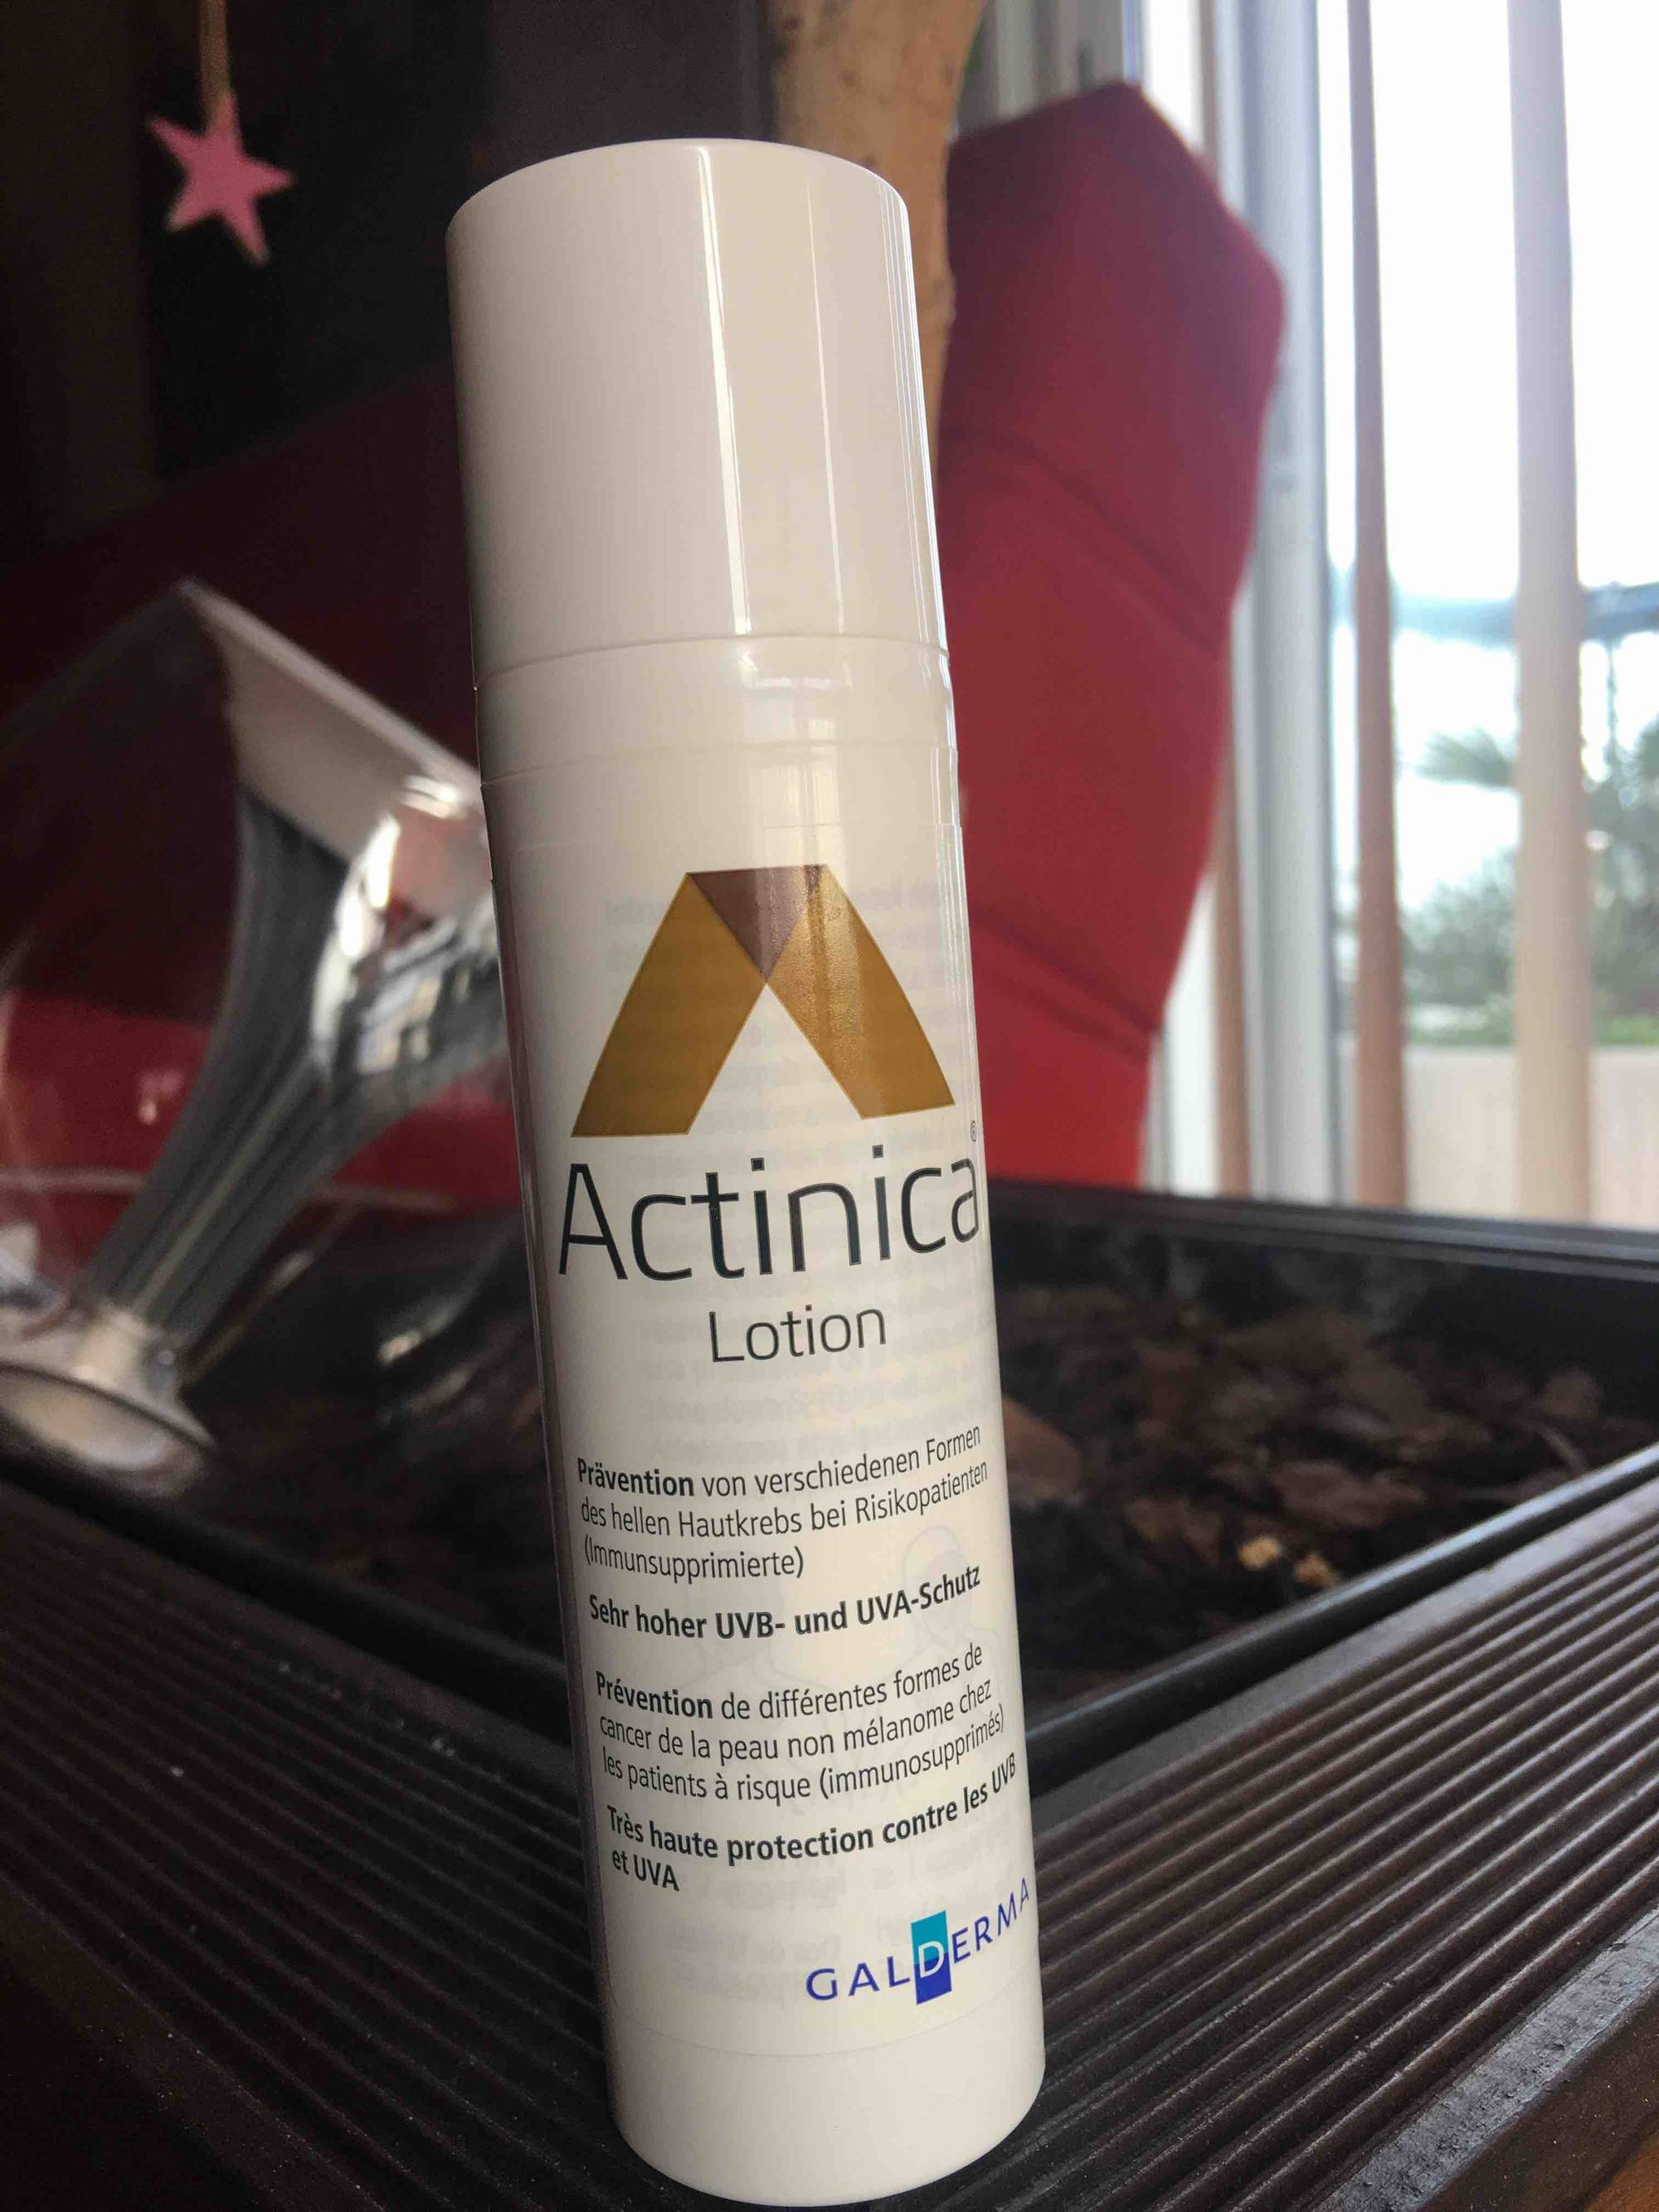 GALDERMA - Actinica - Lotion solaire